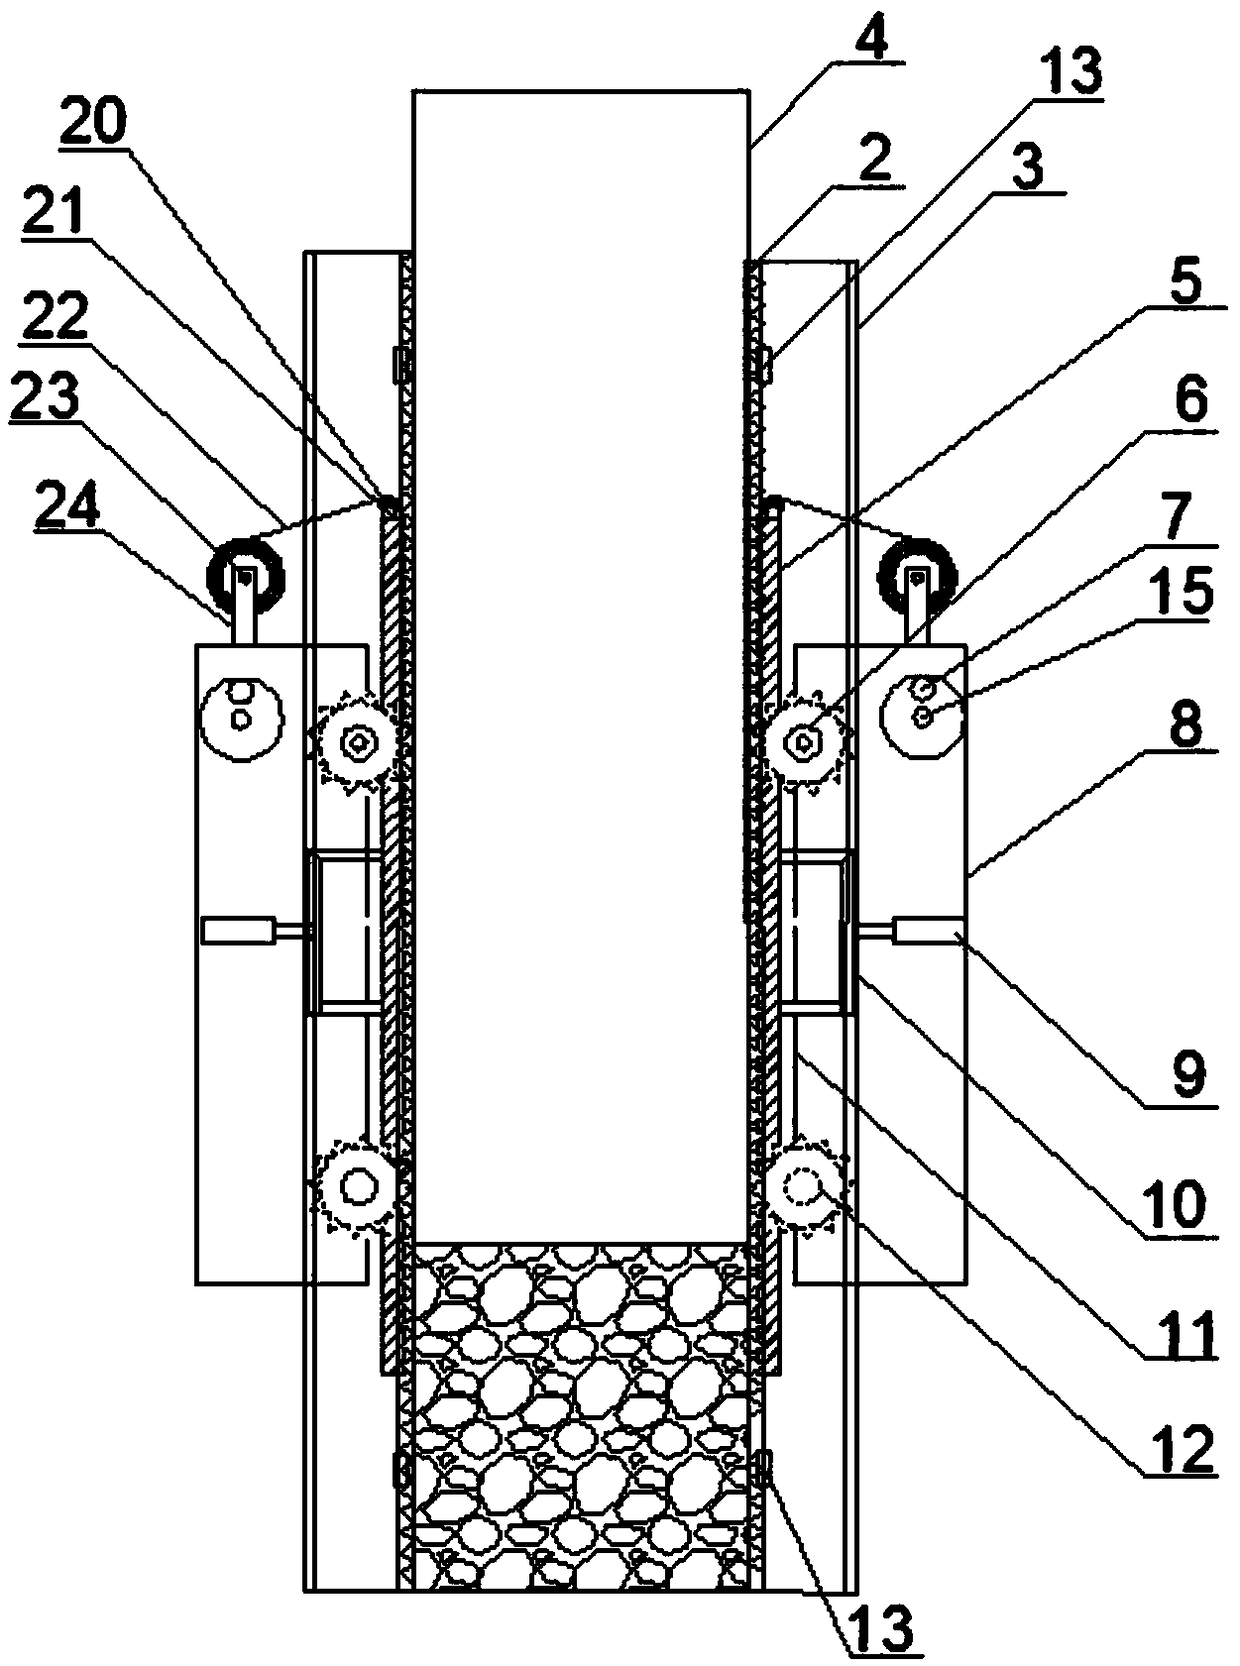 Straight-type wall body constructional column construction device